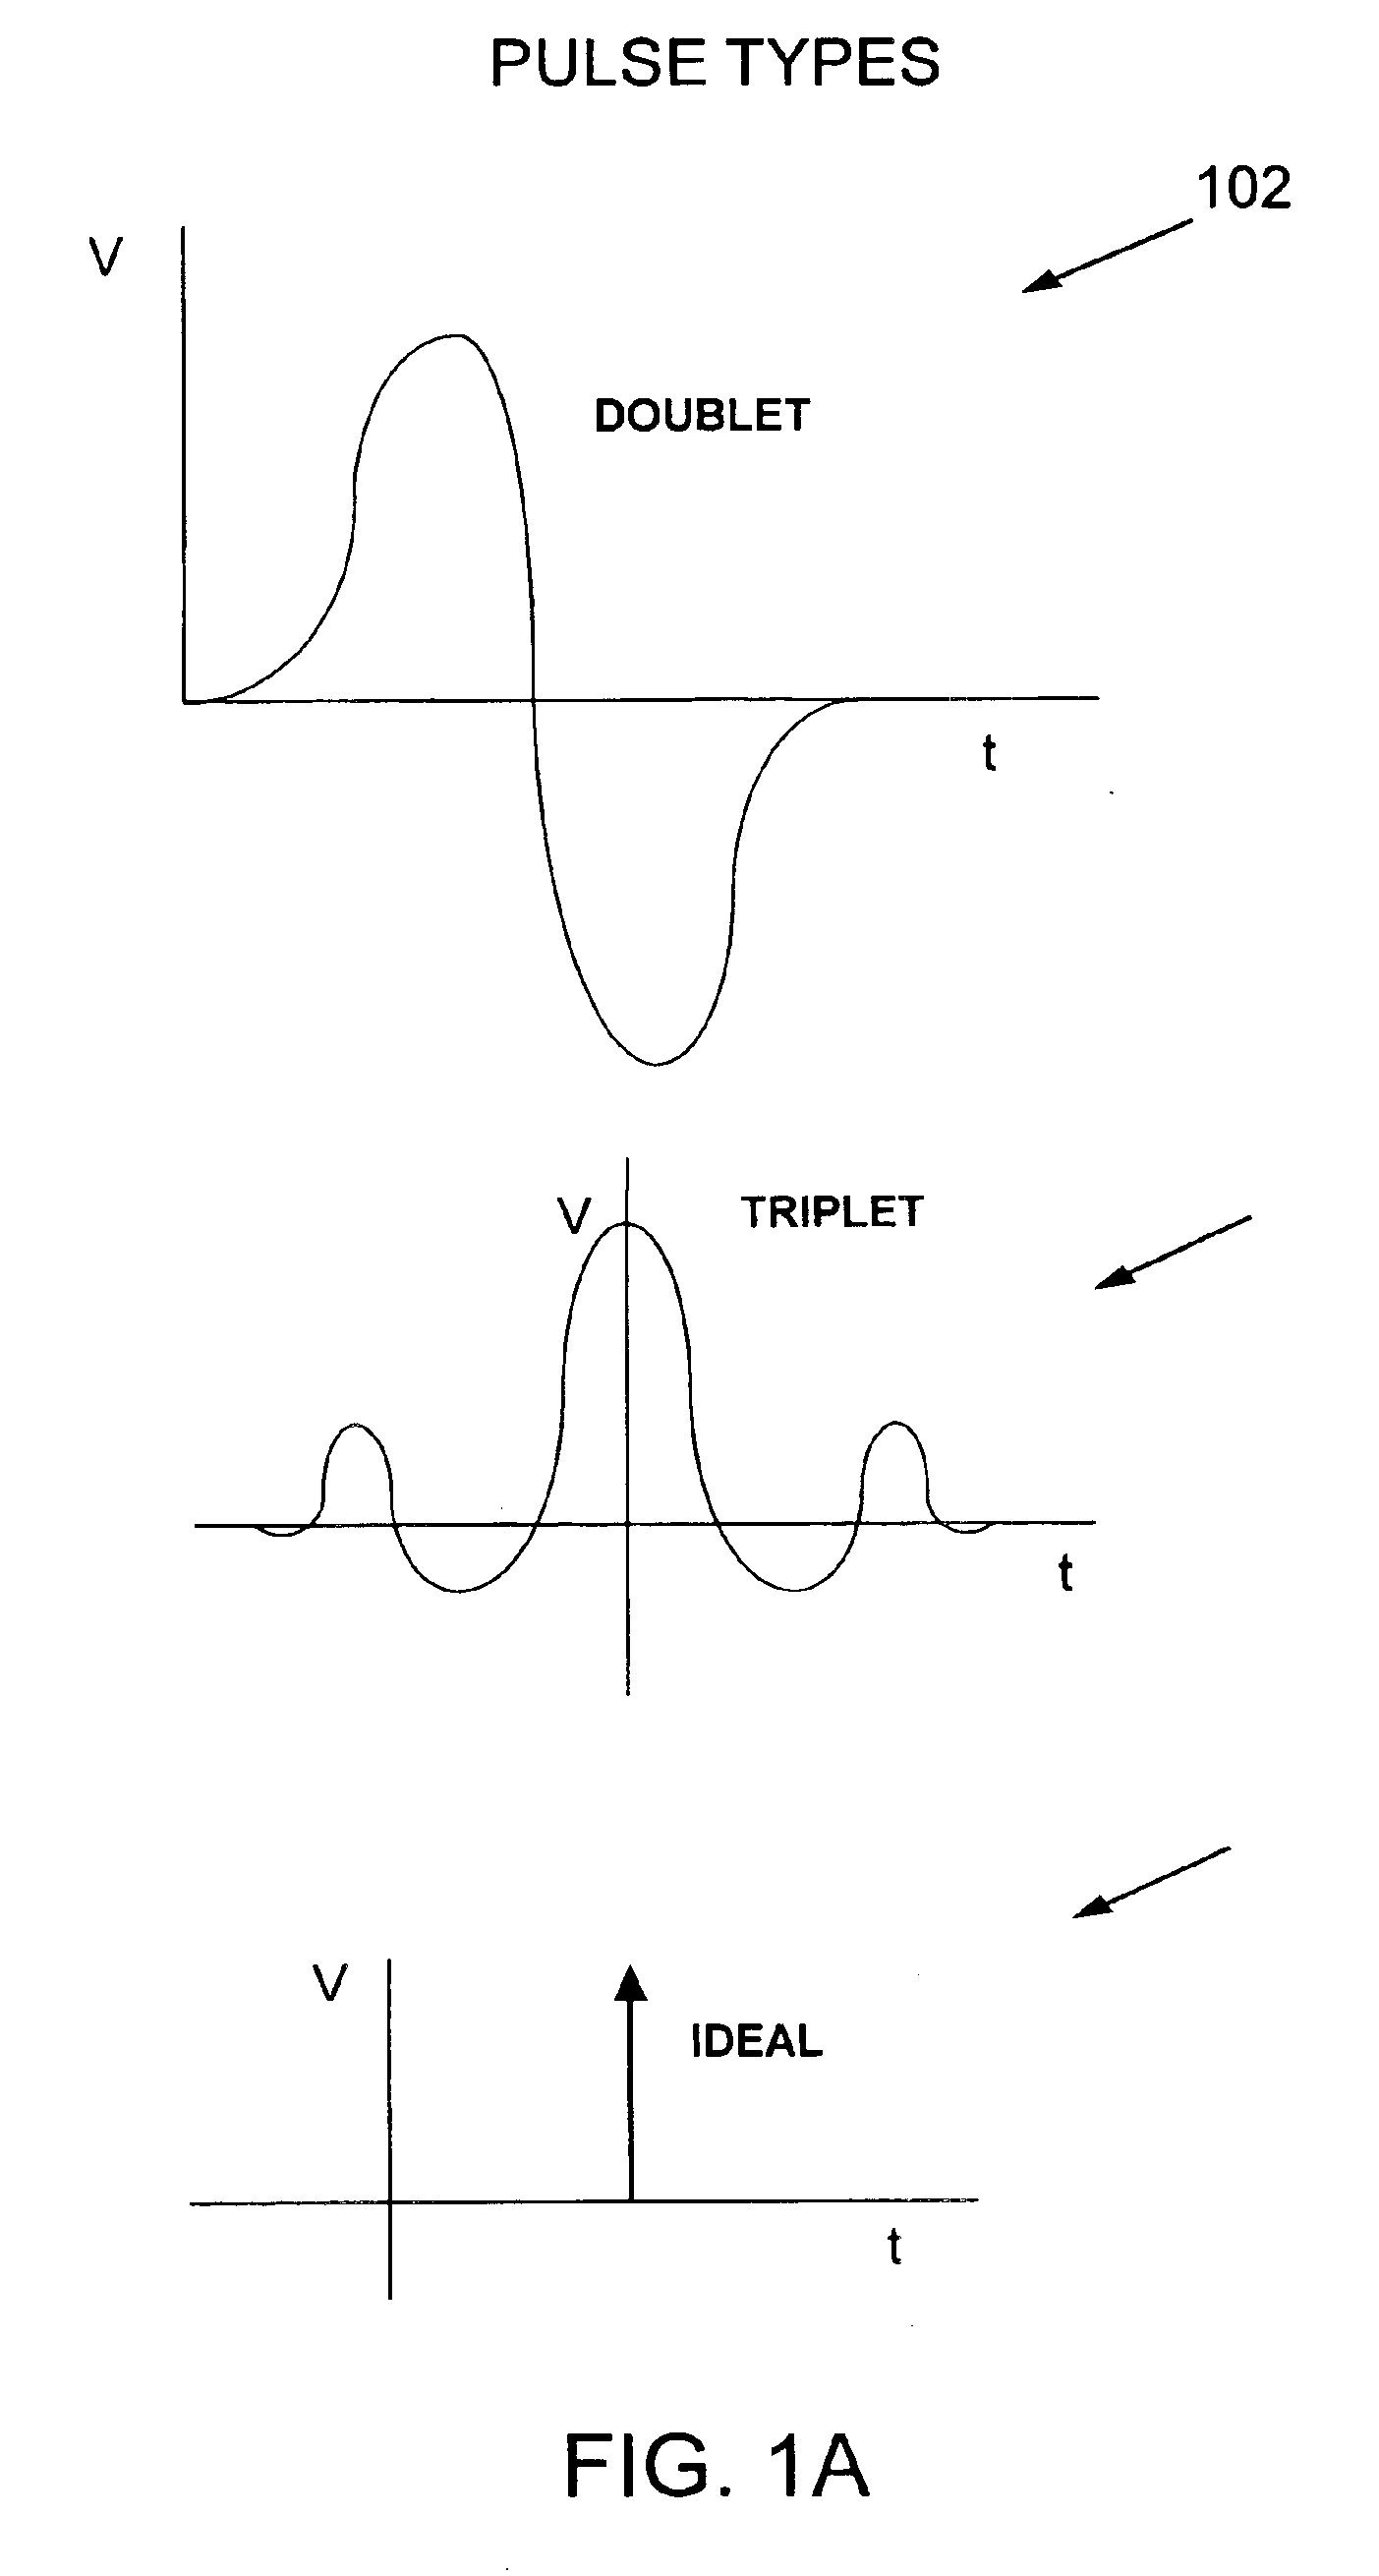 System and method for positioning pulses in time using a code that provides spectral shaping